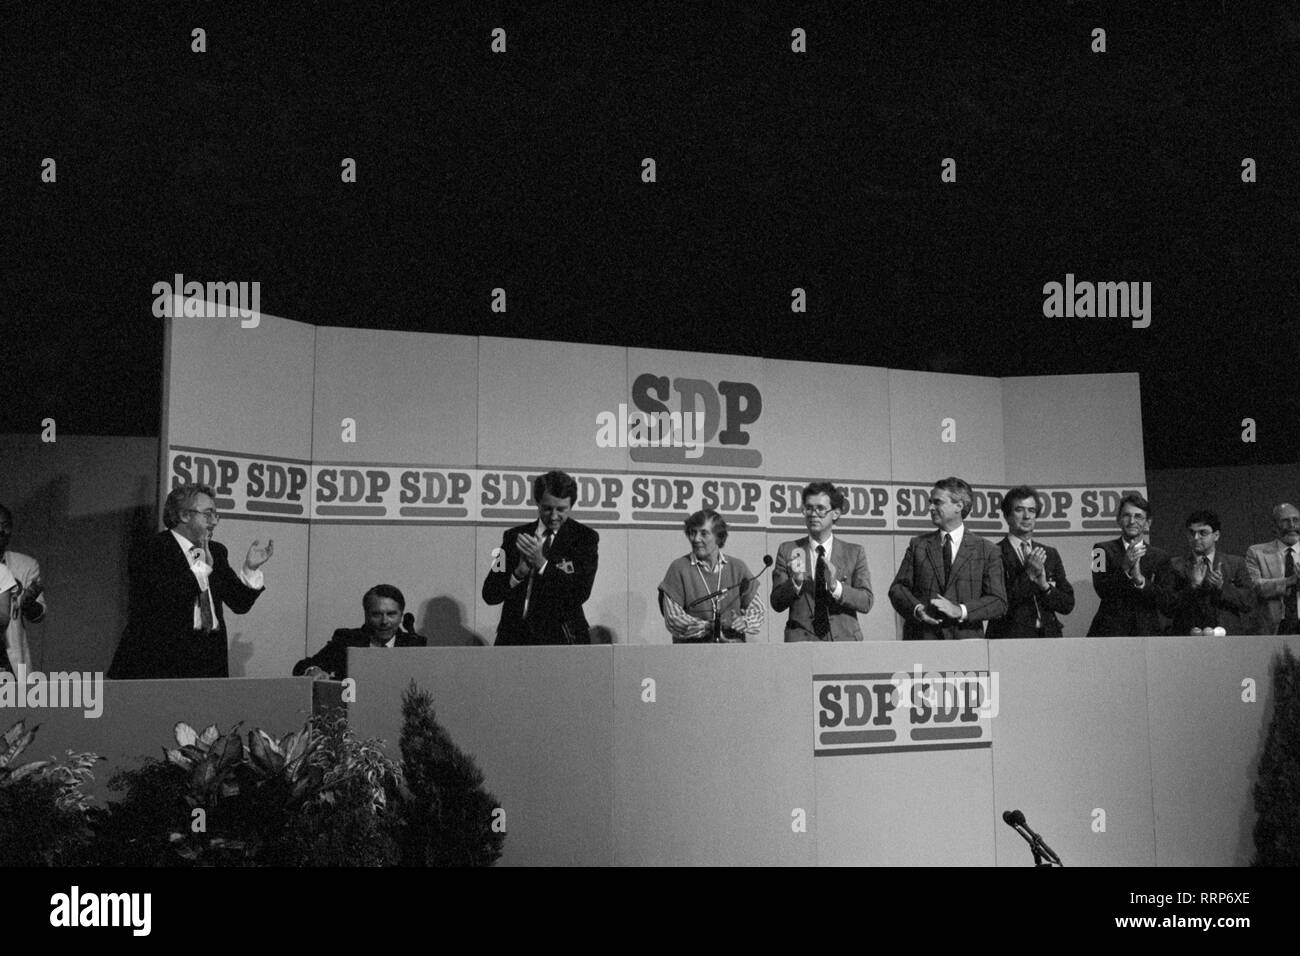 Dr David Owen (seated), former leader of the Social Democratic Party, receives a standing ovation from national committee members on the platform after his speech at the party's conference in Portsmouth. (L-R) Dr Owen, former MP Ian Wrigglesworth, party president Shirley Williams, unidentified, new party leader Robert Maclennan and vice-president Bill Rodgers. Stock Photo